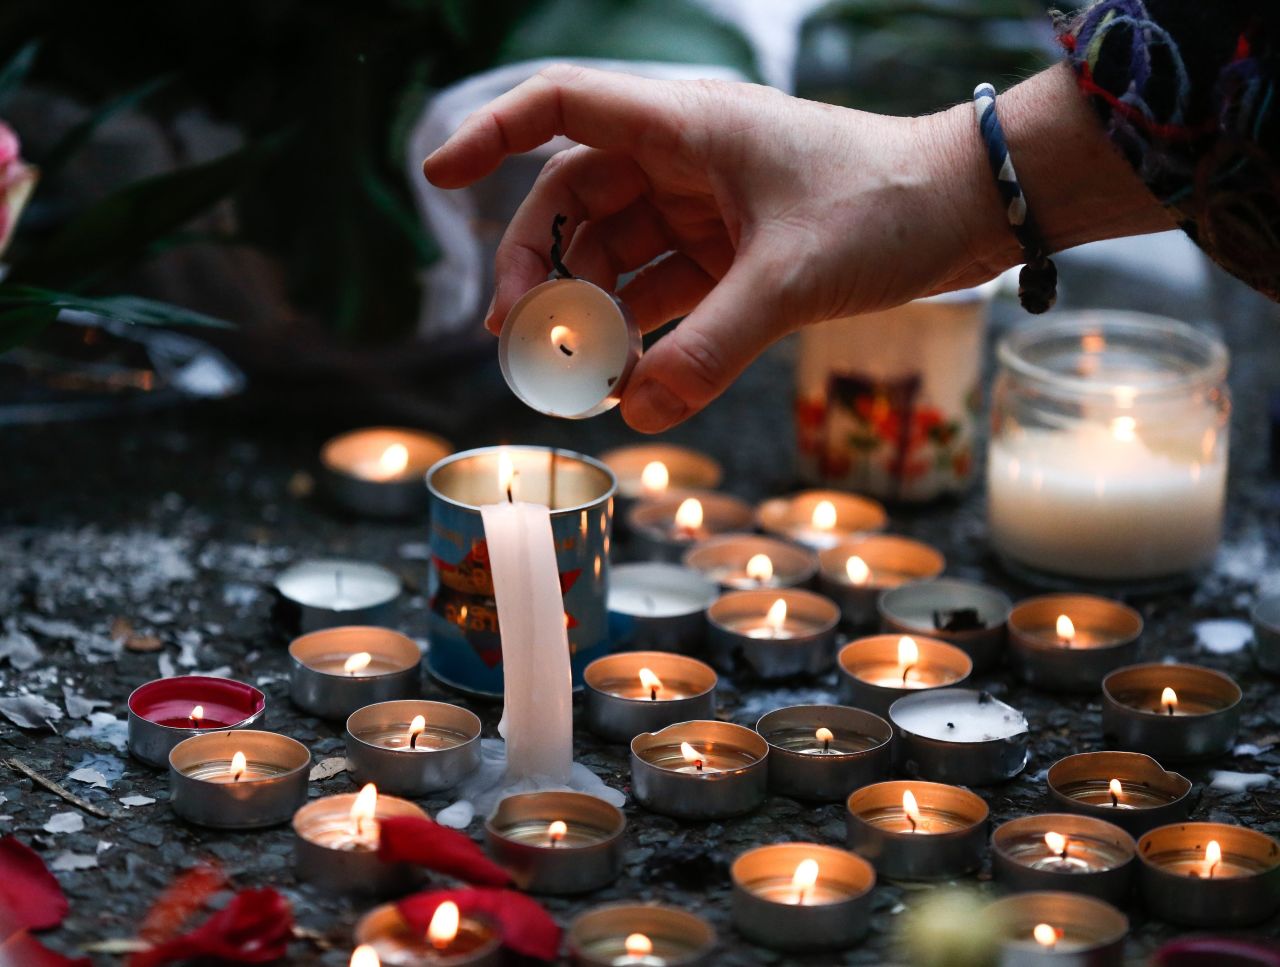 A woman lights candles at a memorial near the Bataclan theater in Paris on November 14.